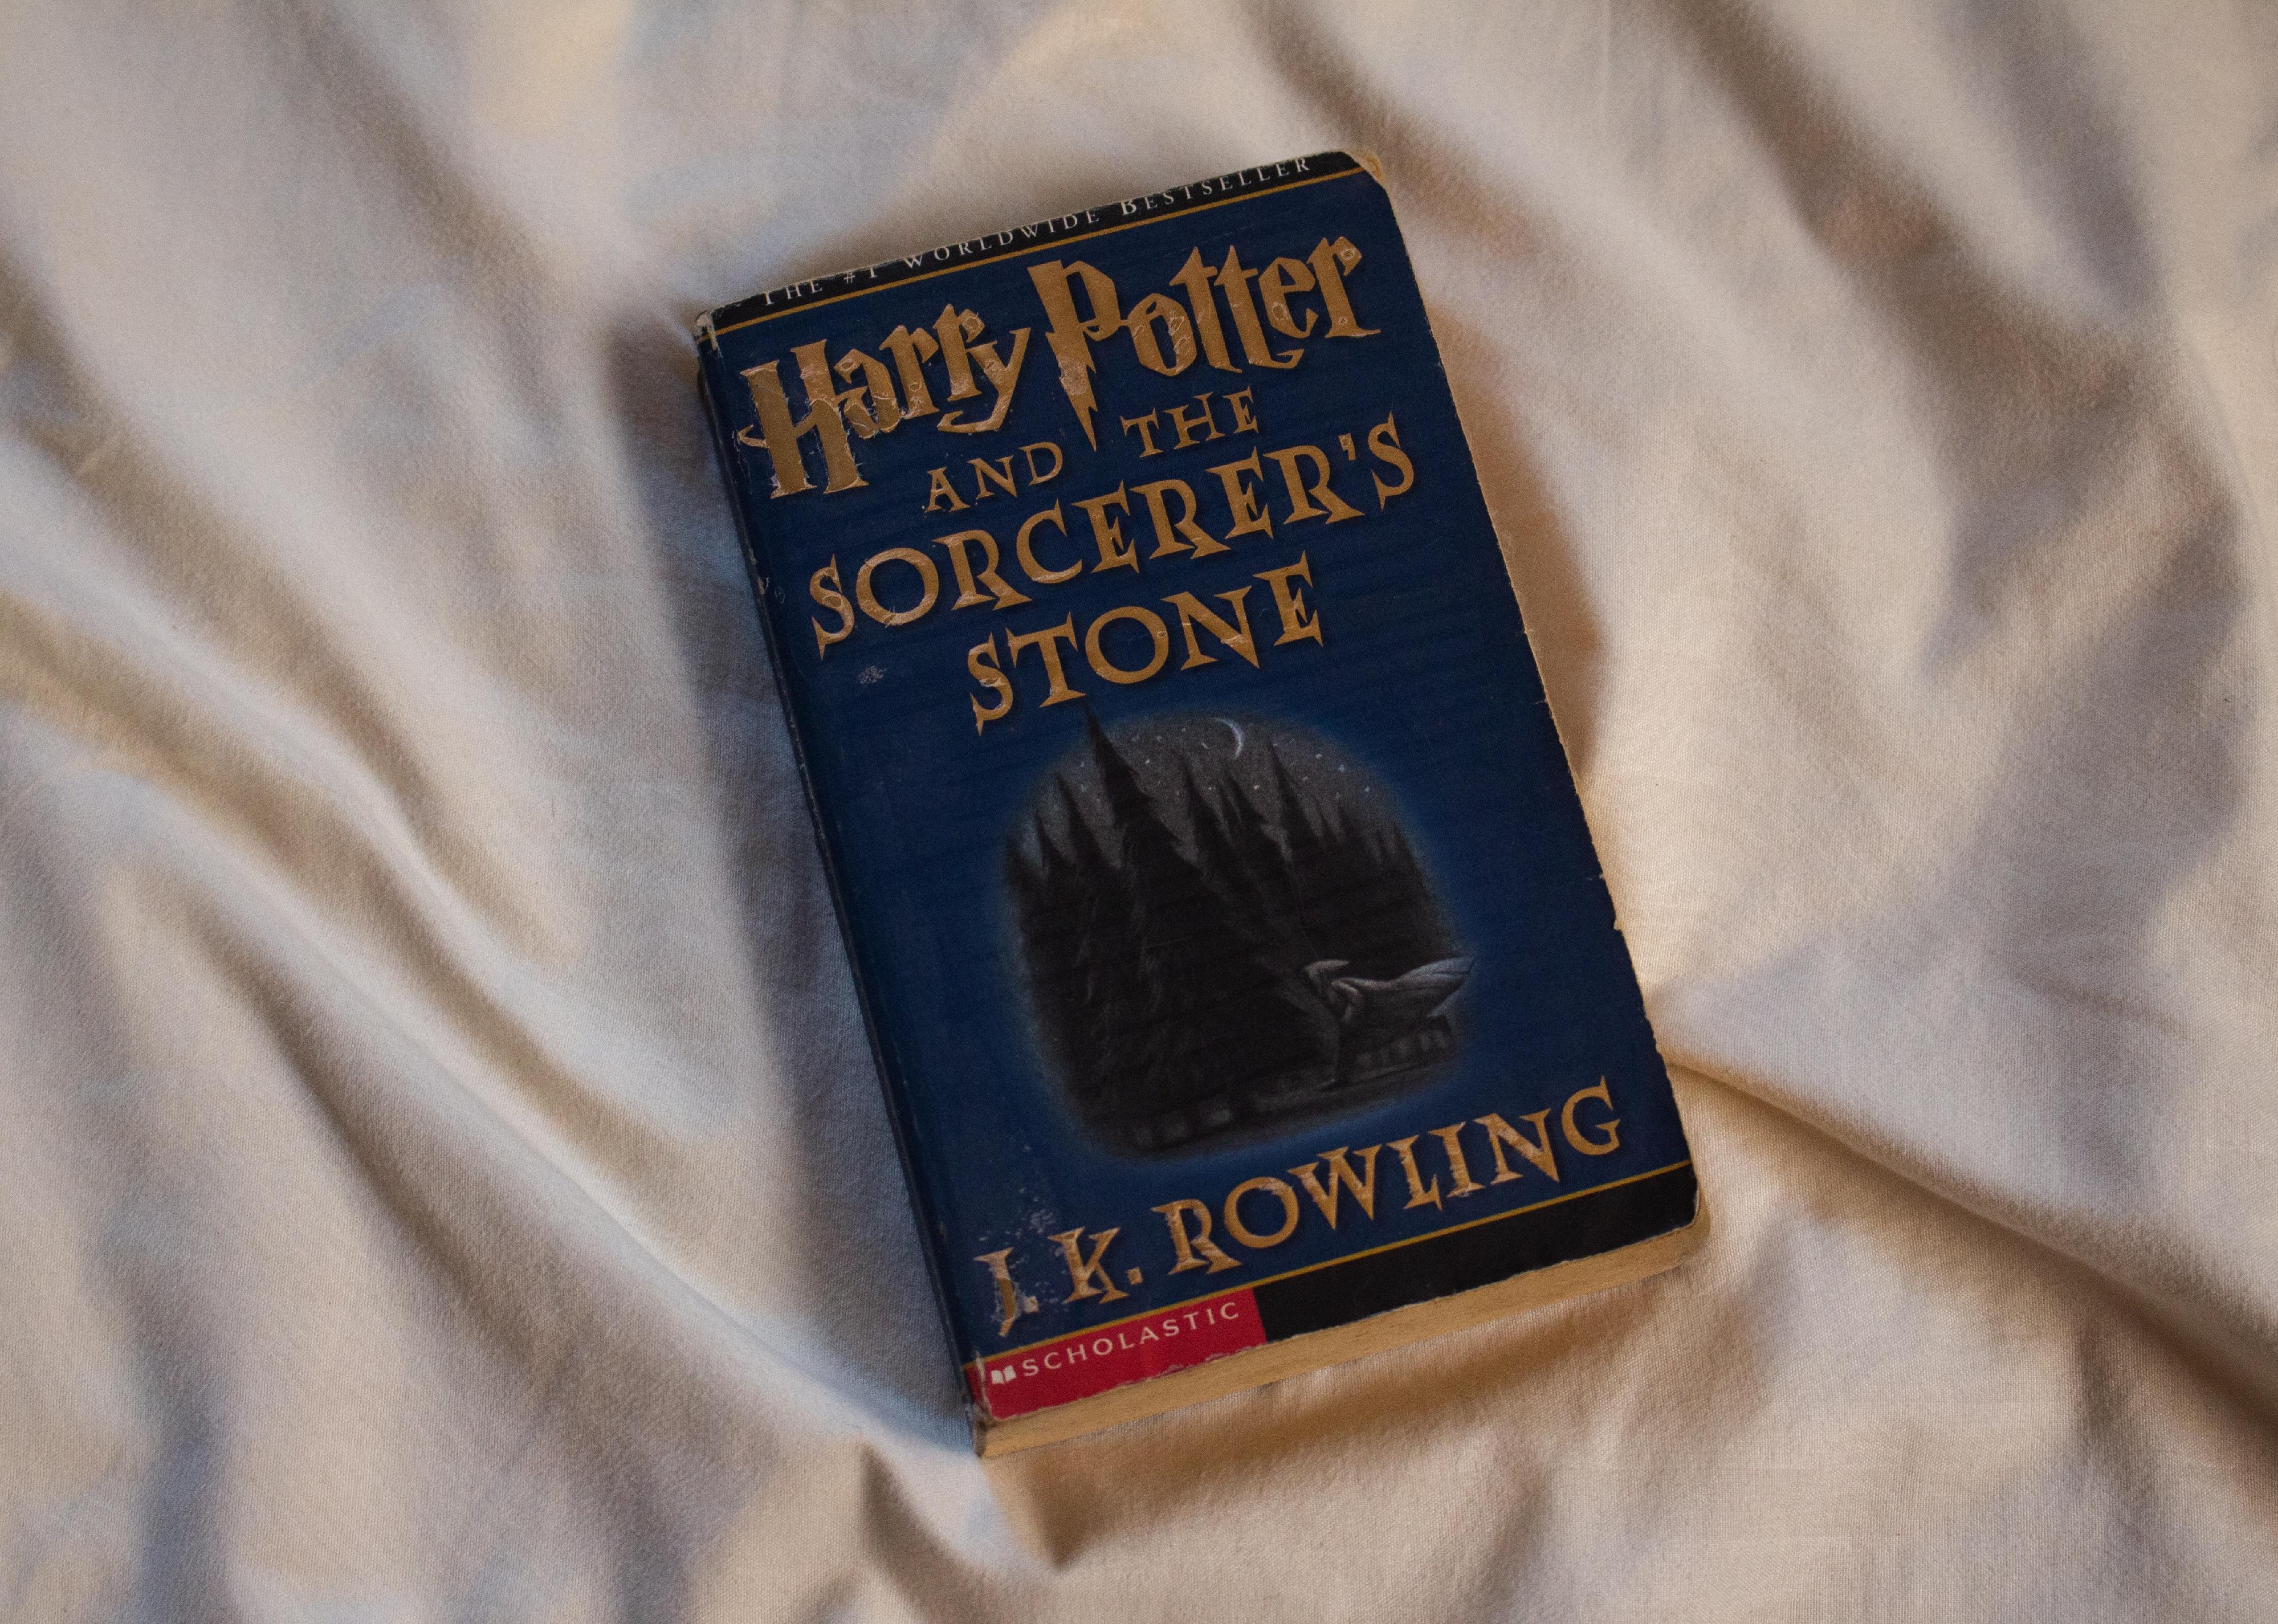 'Harry Potter and the Sorcerer's Stone' book on bed sheet.